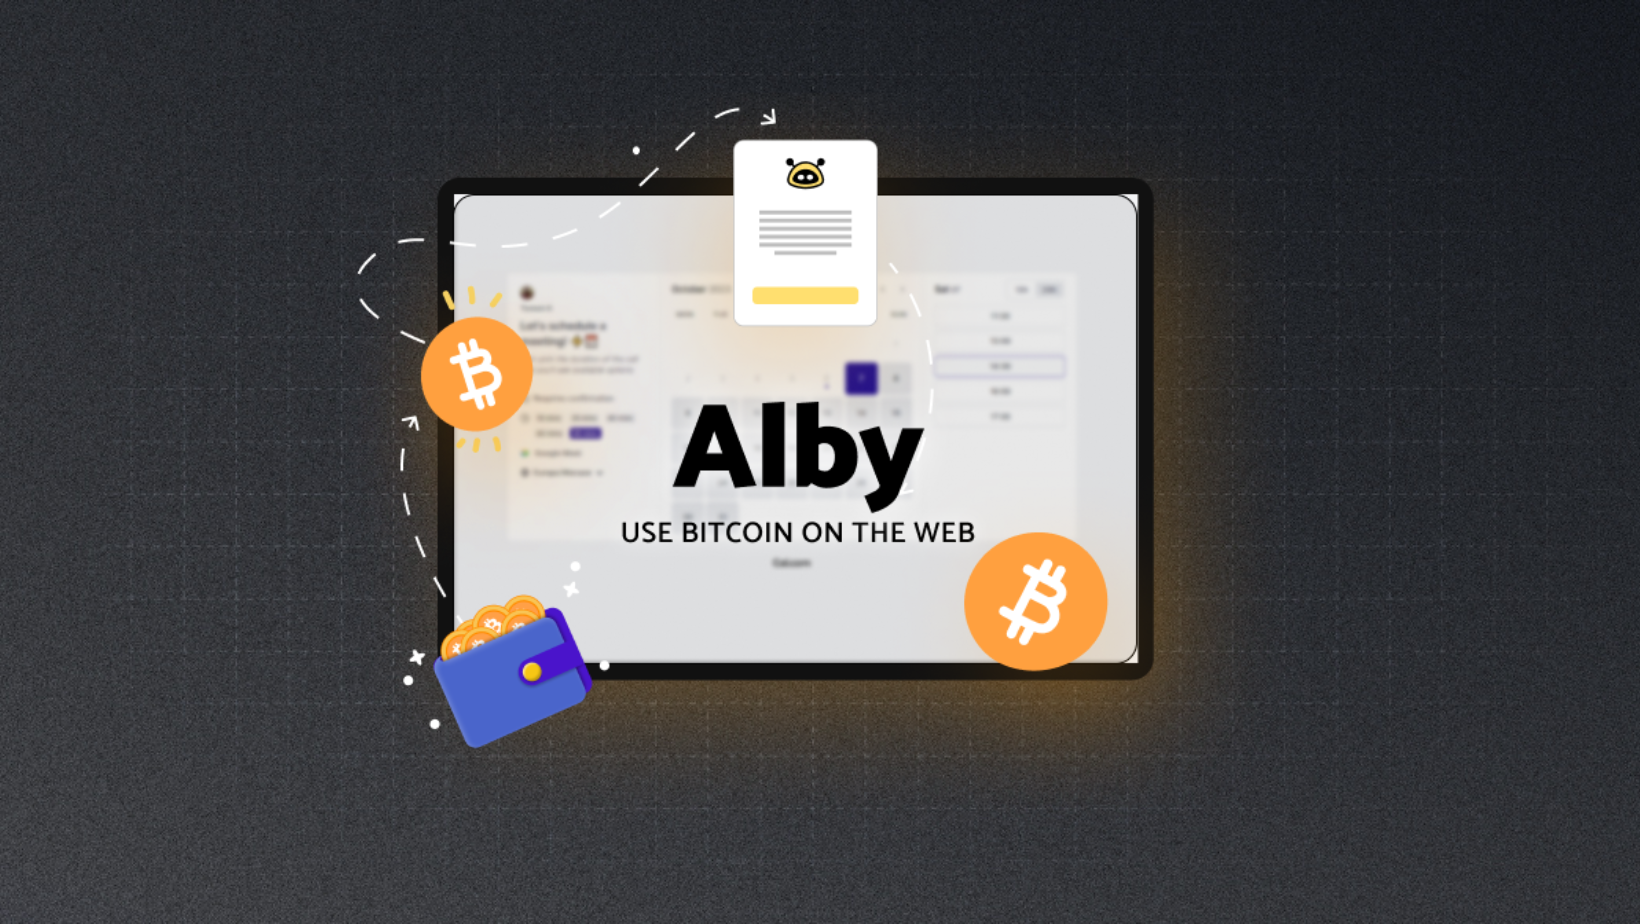 Introducing Alby: The Bitcoin-Friendly Payment Solution